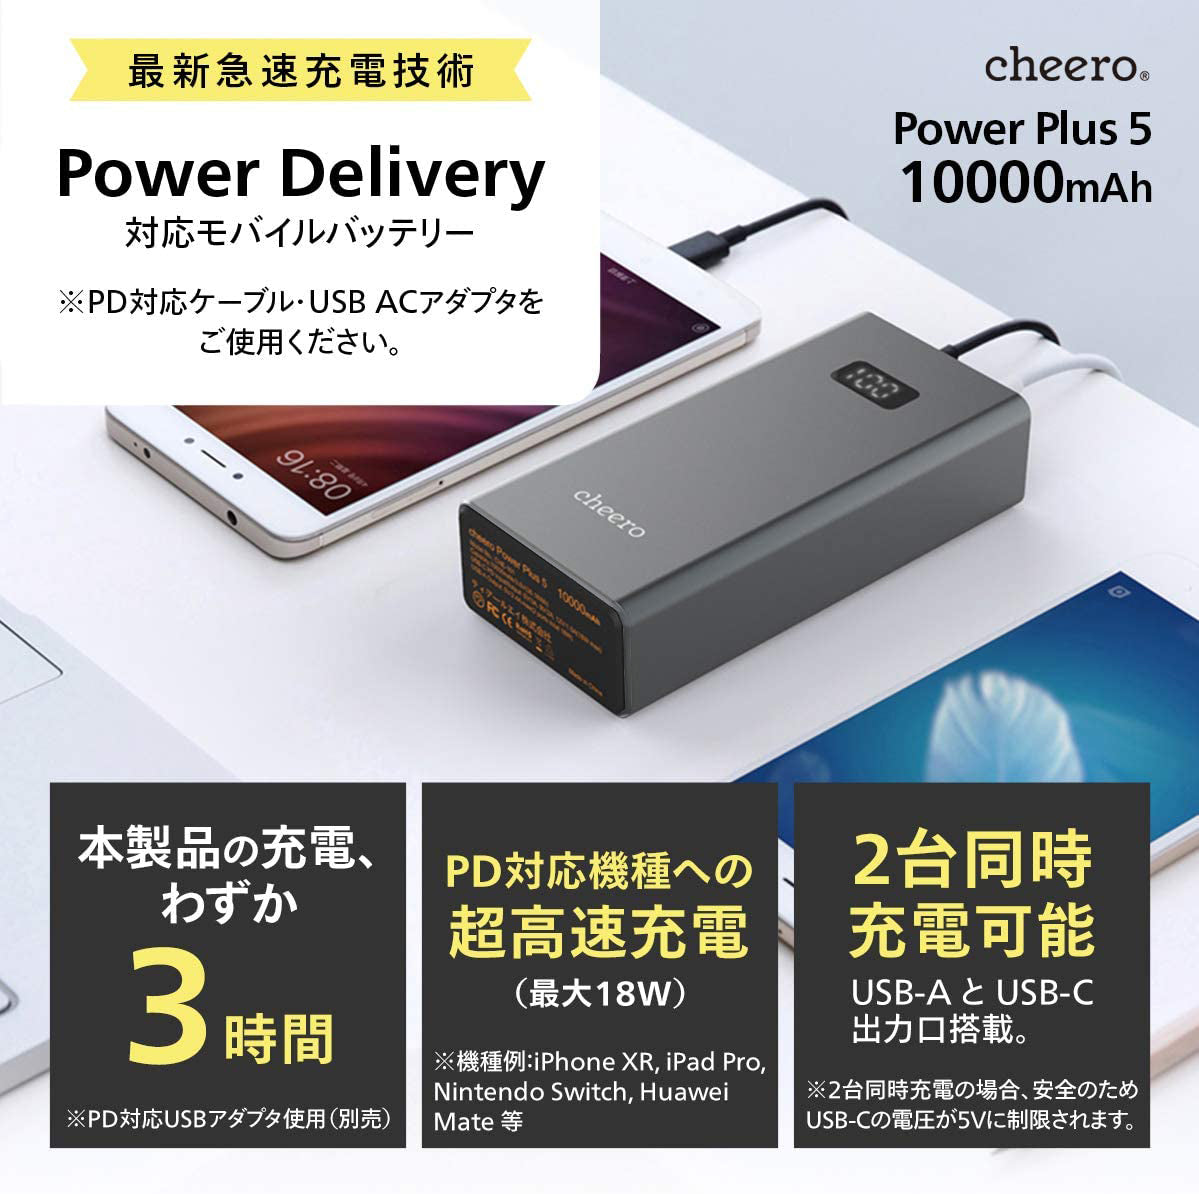 cheero Power Plus 10000mAh with Power Delivery 18W – cheero_official